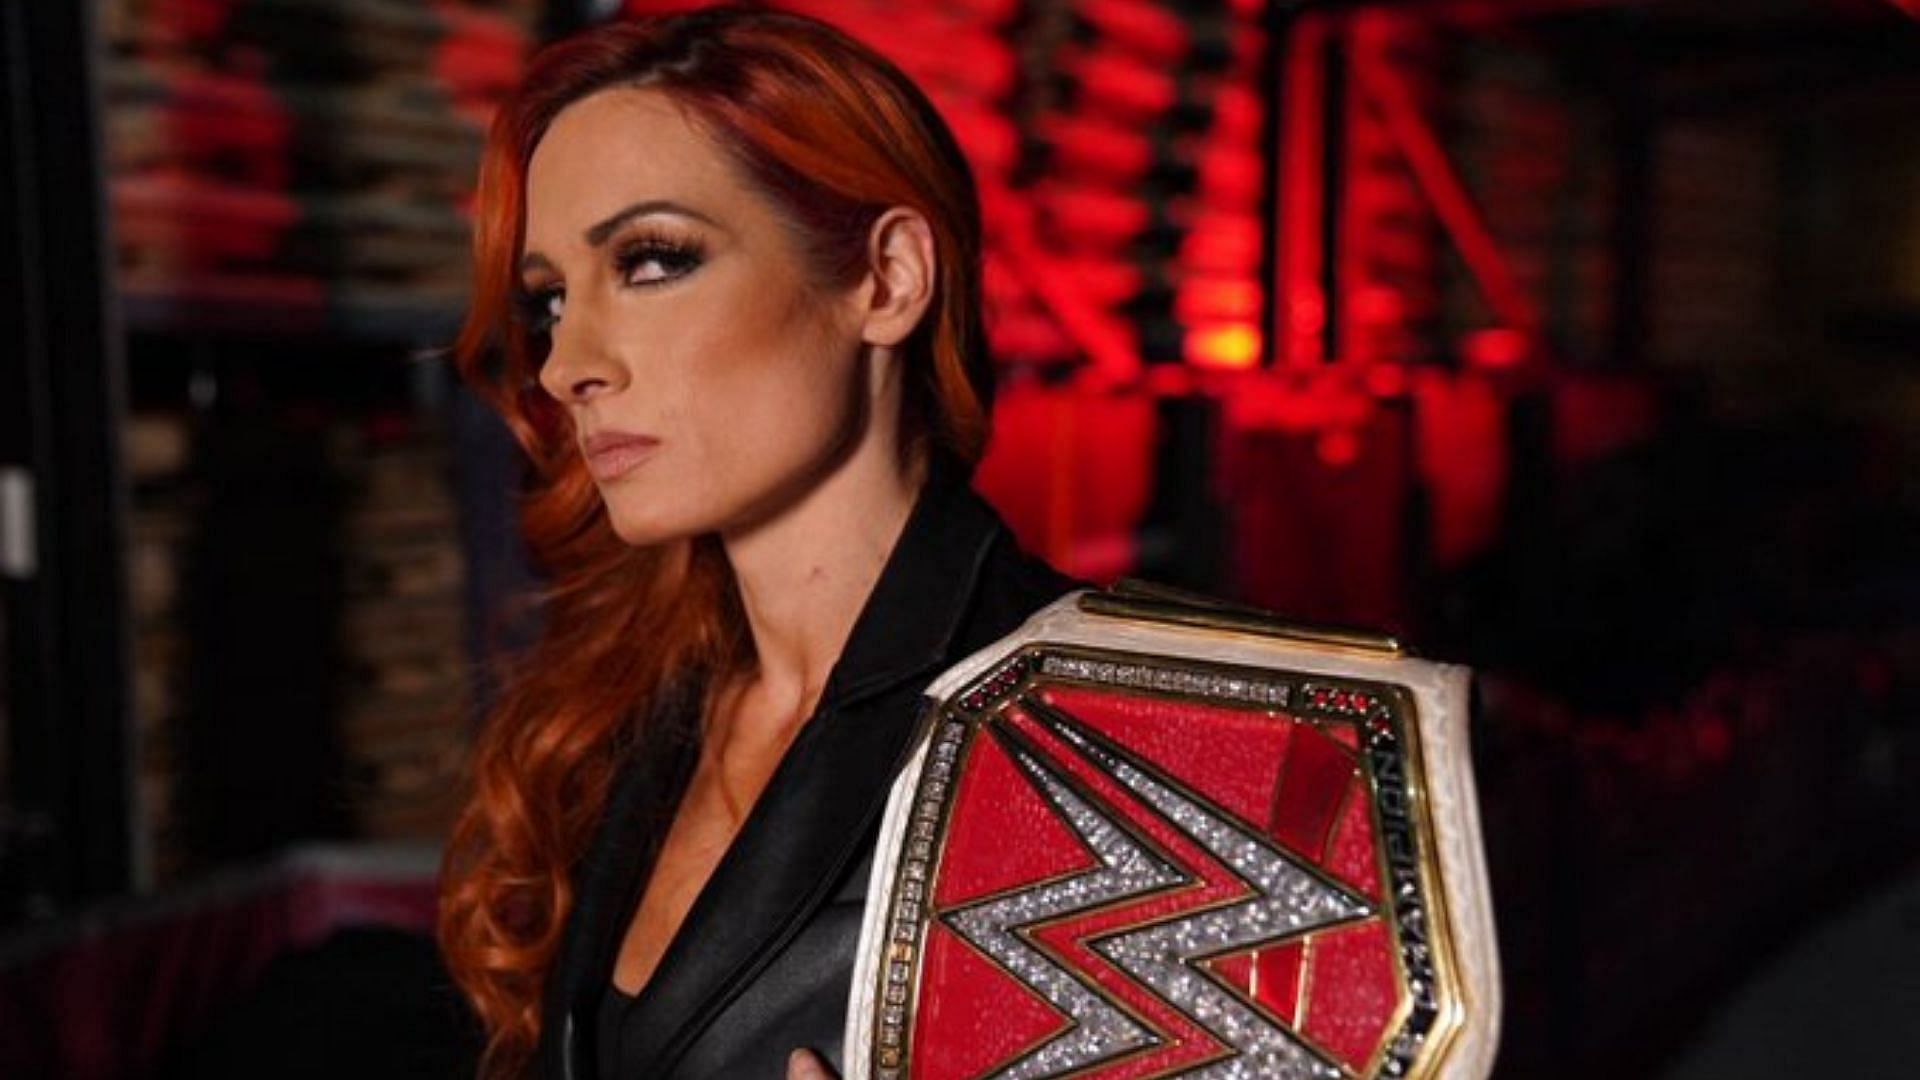 Becky is scheduled to face Bianca Belair at WrestleMania.